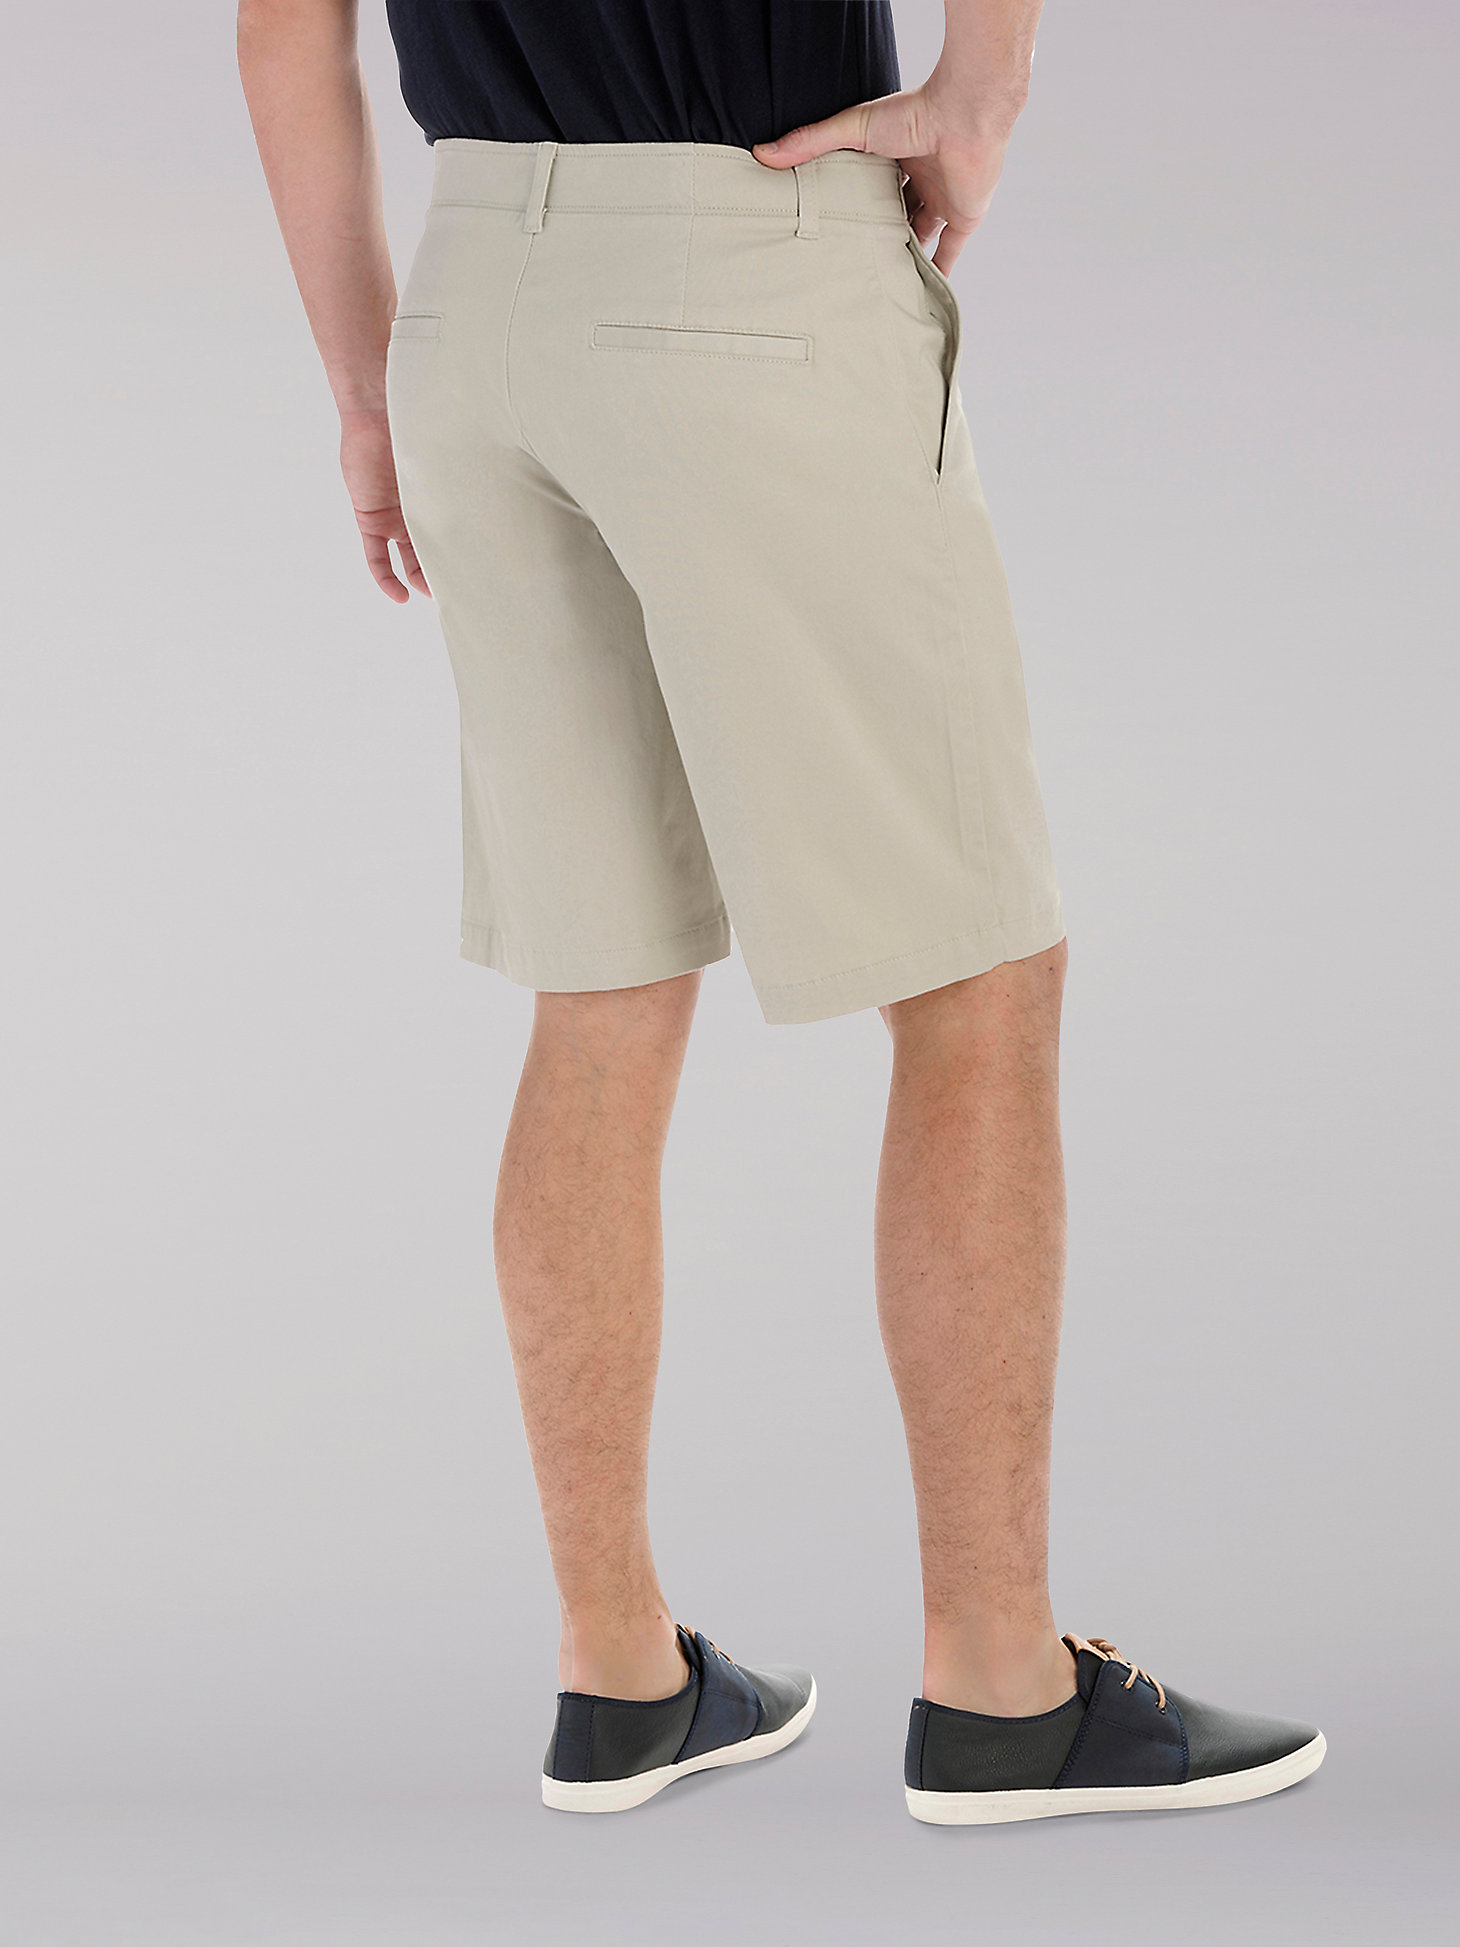 Men's Extreme Motion Short (Big & Tall) in Stone alternative view 1